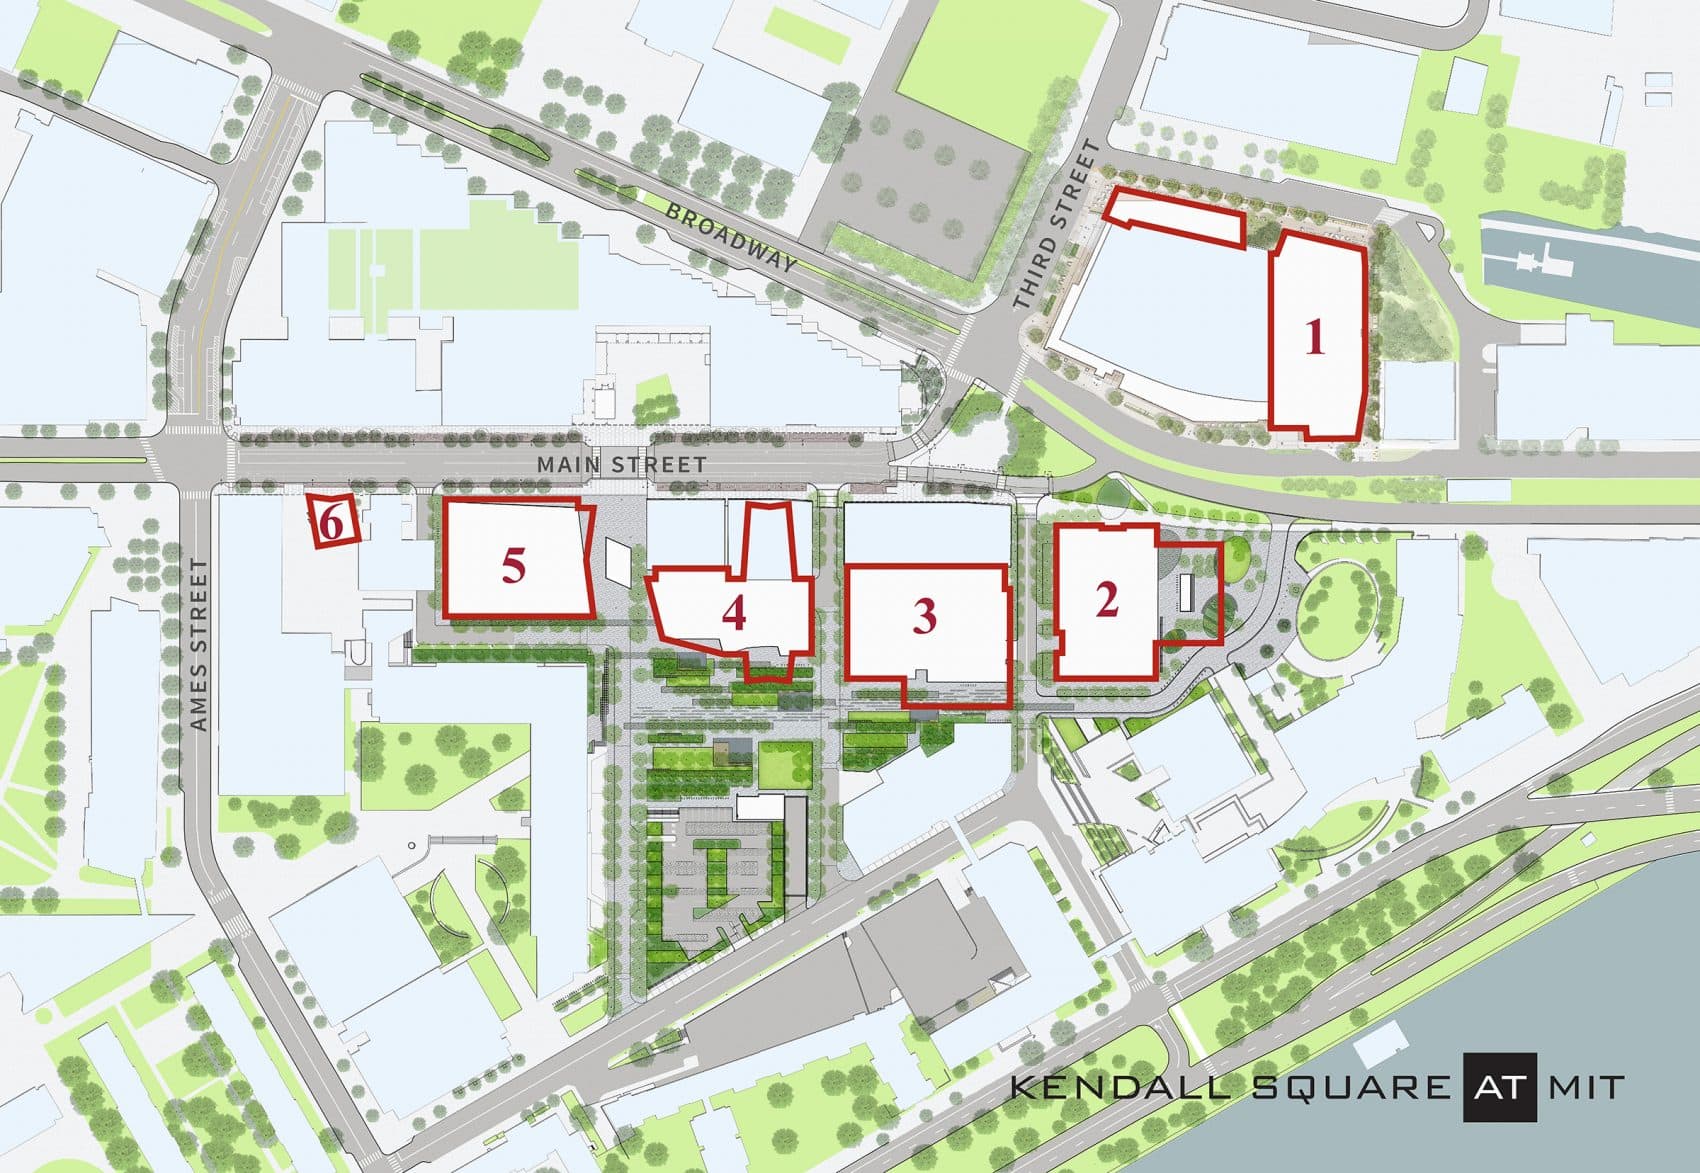 A map of MIT's Kendall Square Initiative, a development project that will include six sites slated for housing, retail, office space, research and development, and outdoor space. project. The project will cost $2 billion, according to MIT officials. (Courtesy: MITIMCO)